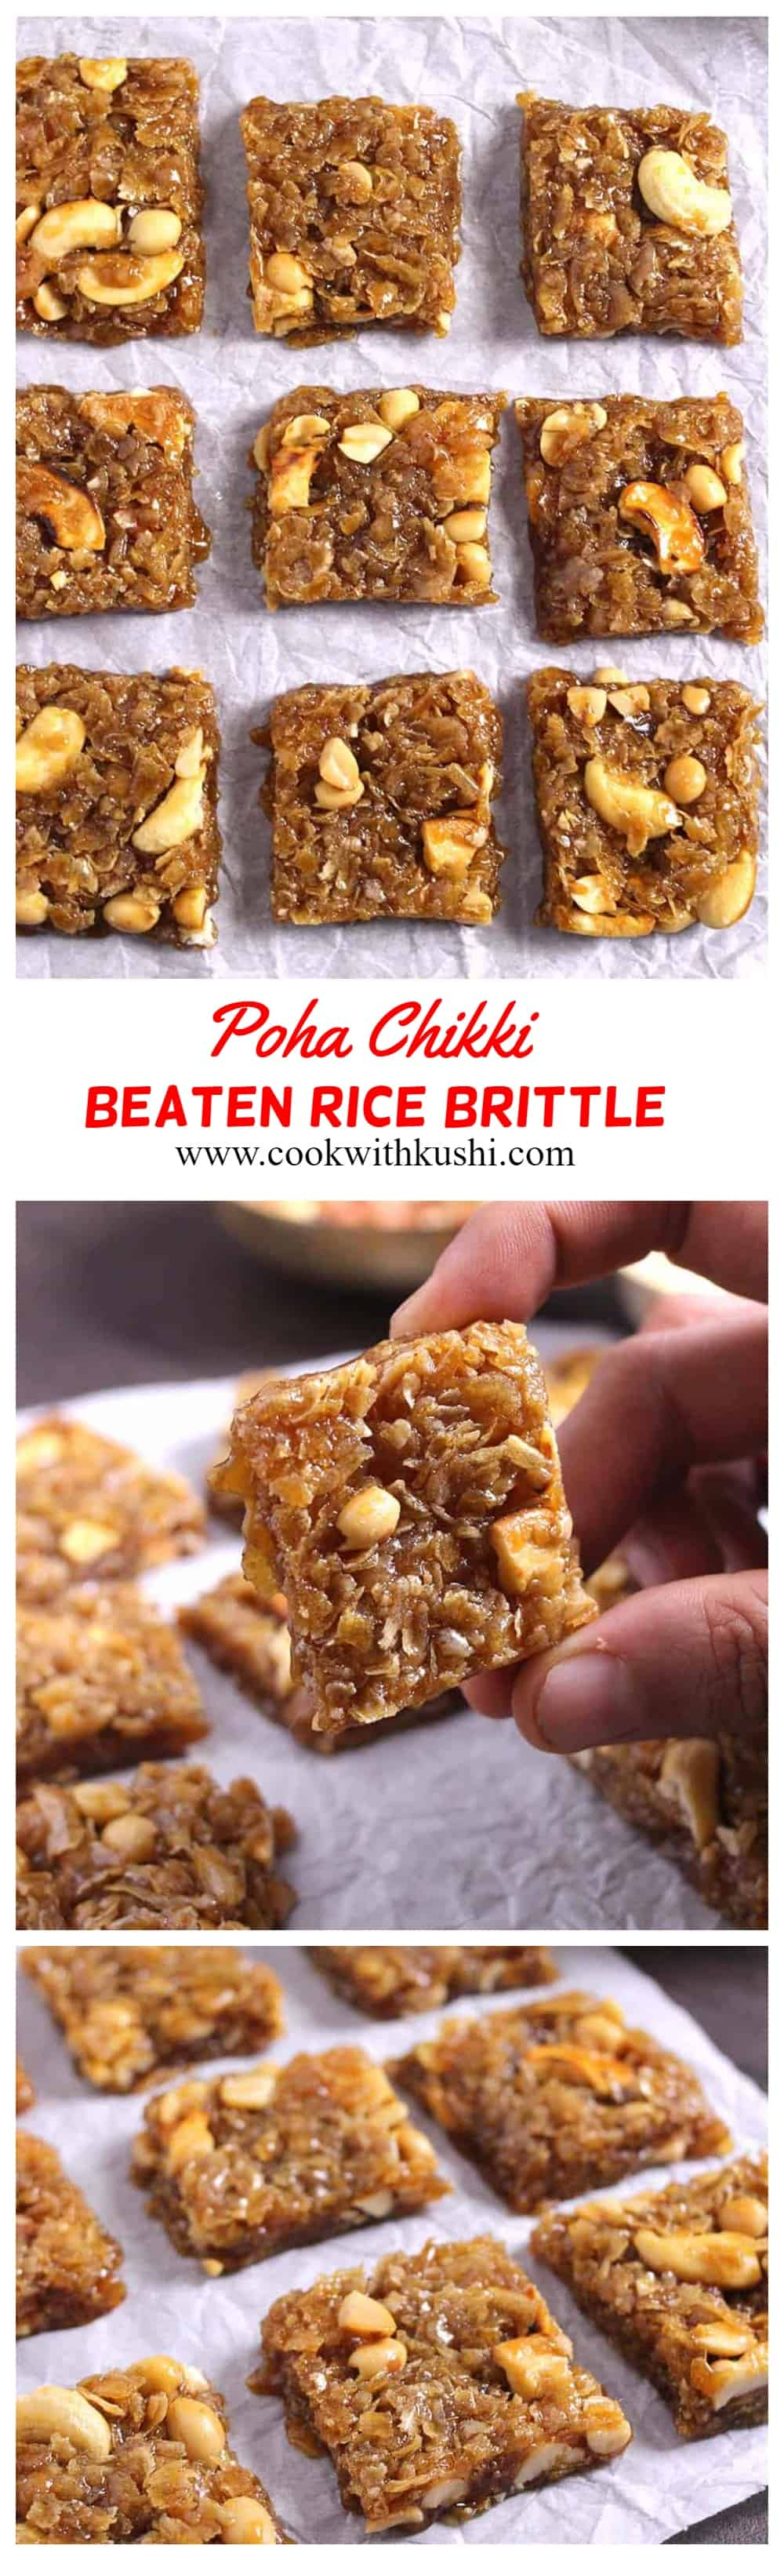 Poha Burfi or Chikki is an aromatic Indian snack bar that is chewy and crunchy prepared using poha (beaten rice), peanuts, and cashews in less than 30 minutes. The texture of this bar is actually between barfi and chikki (brittle). #poha #Pohe #chikki #Brittle #Indiansweets #snackbars